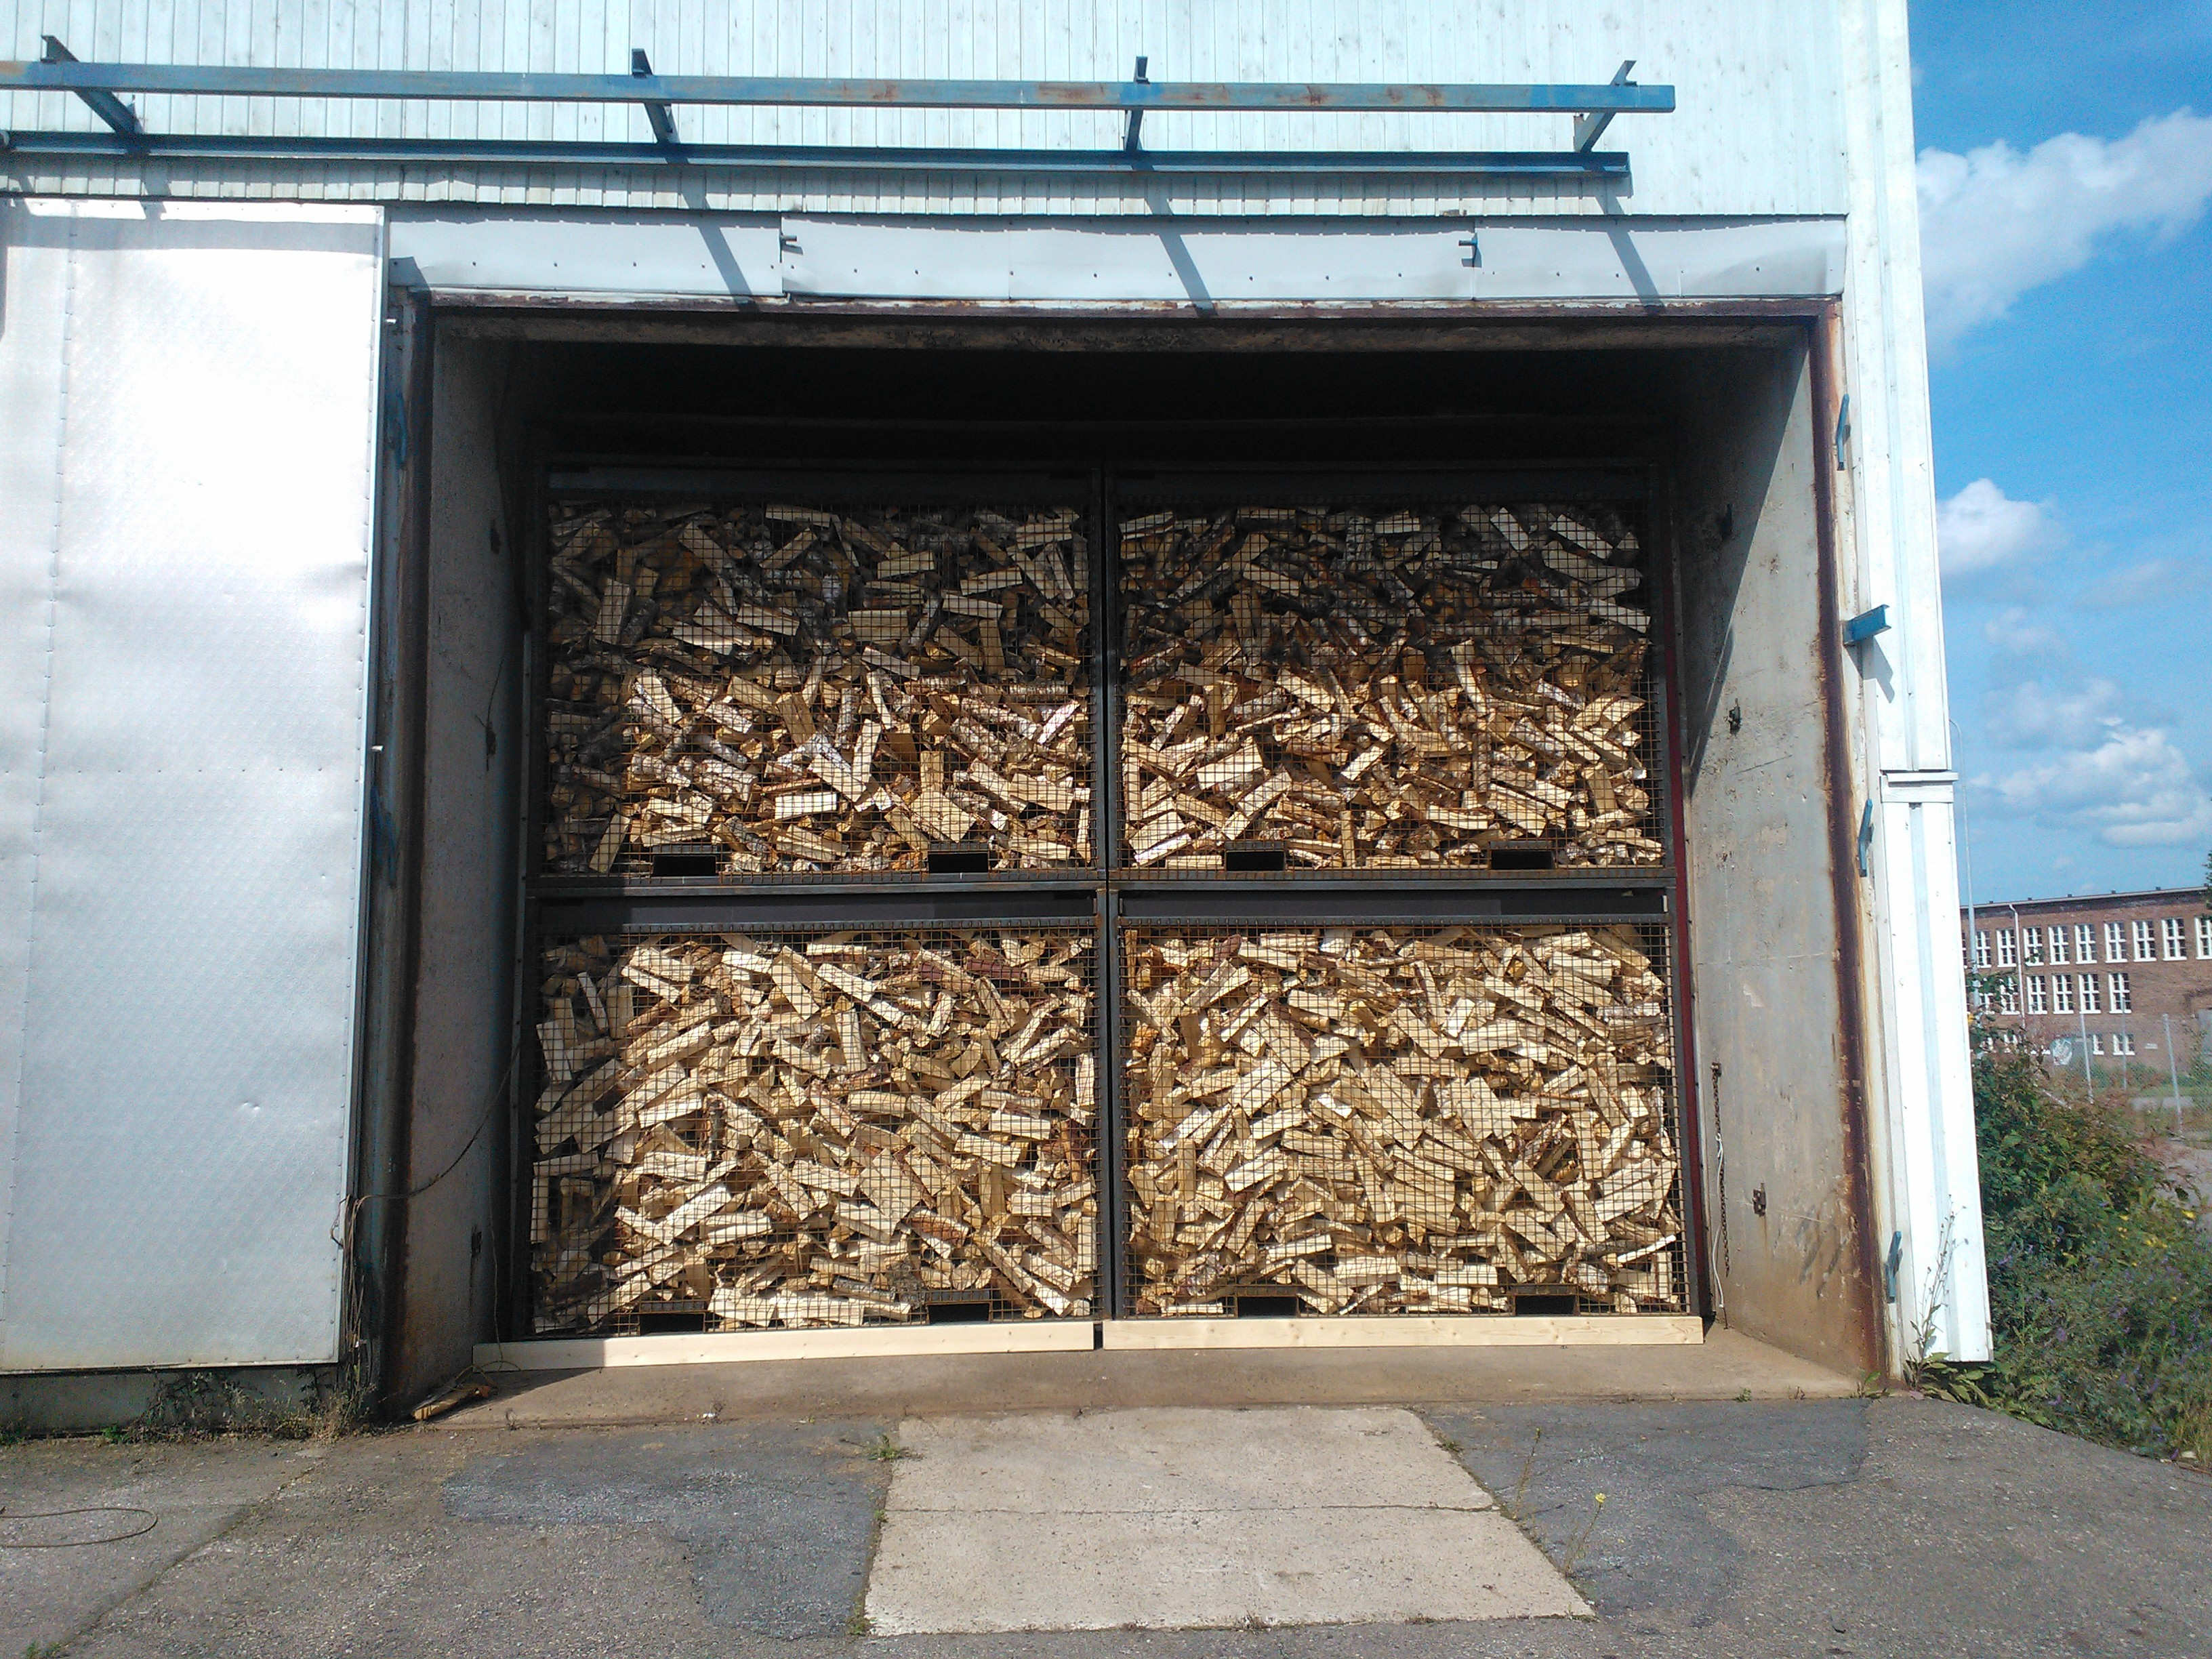 Industrial scale firewood drying kiln